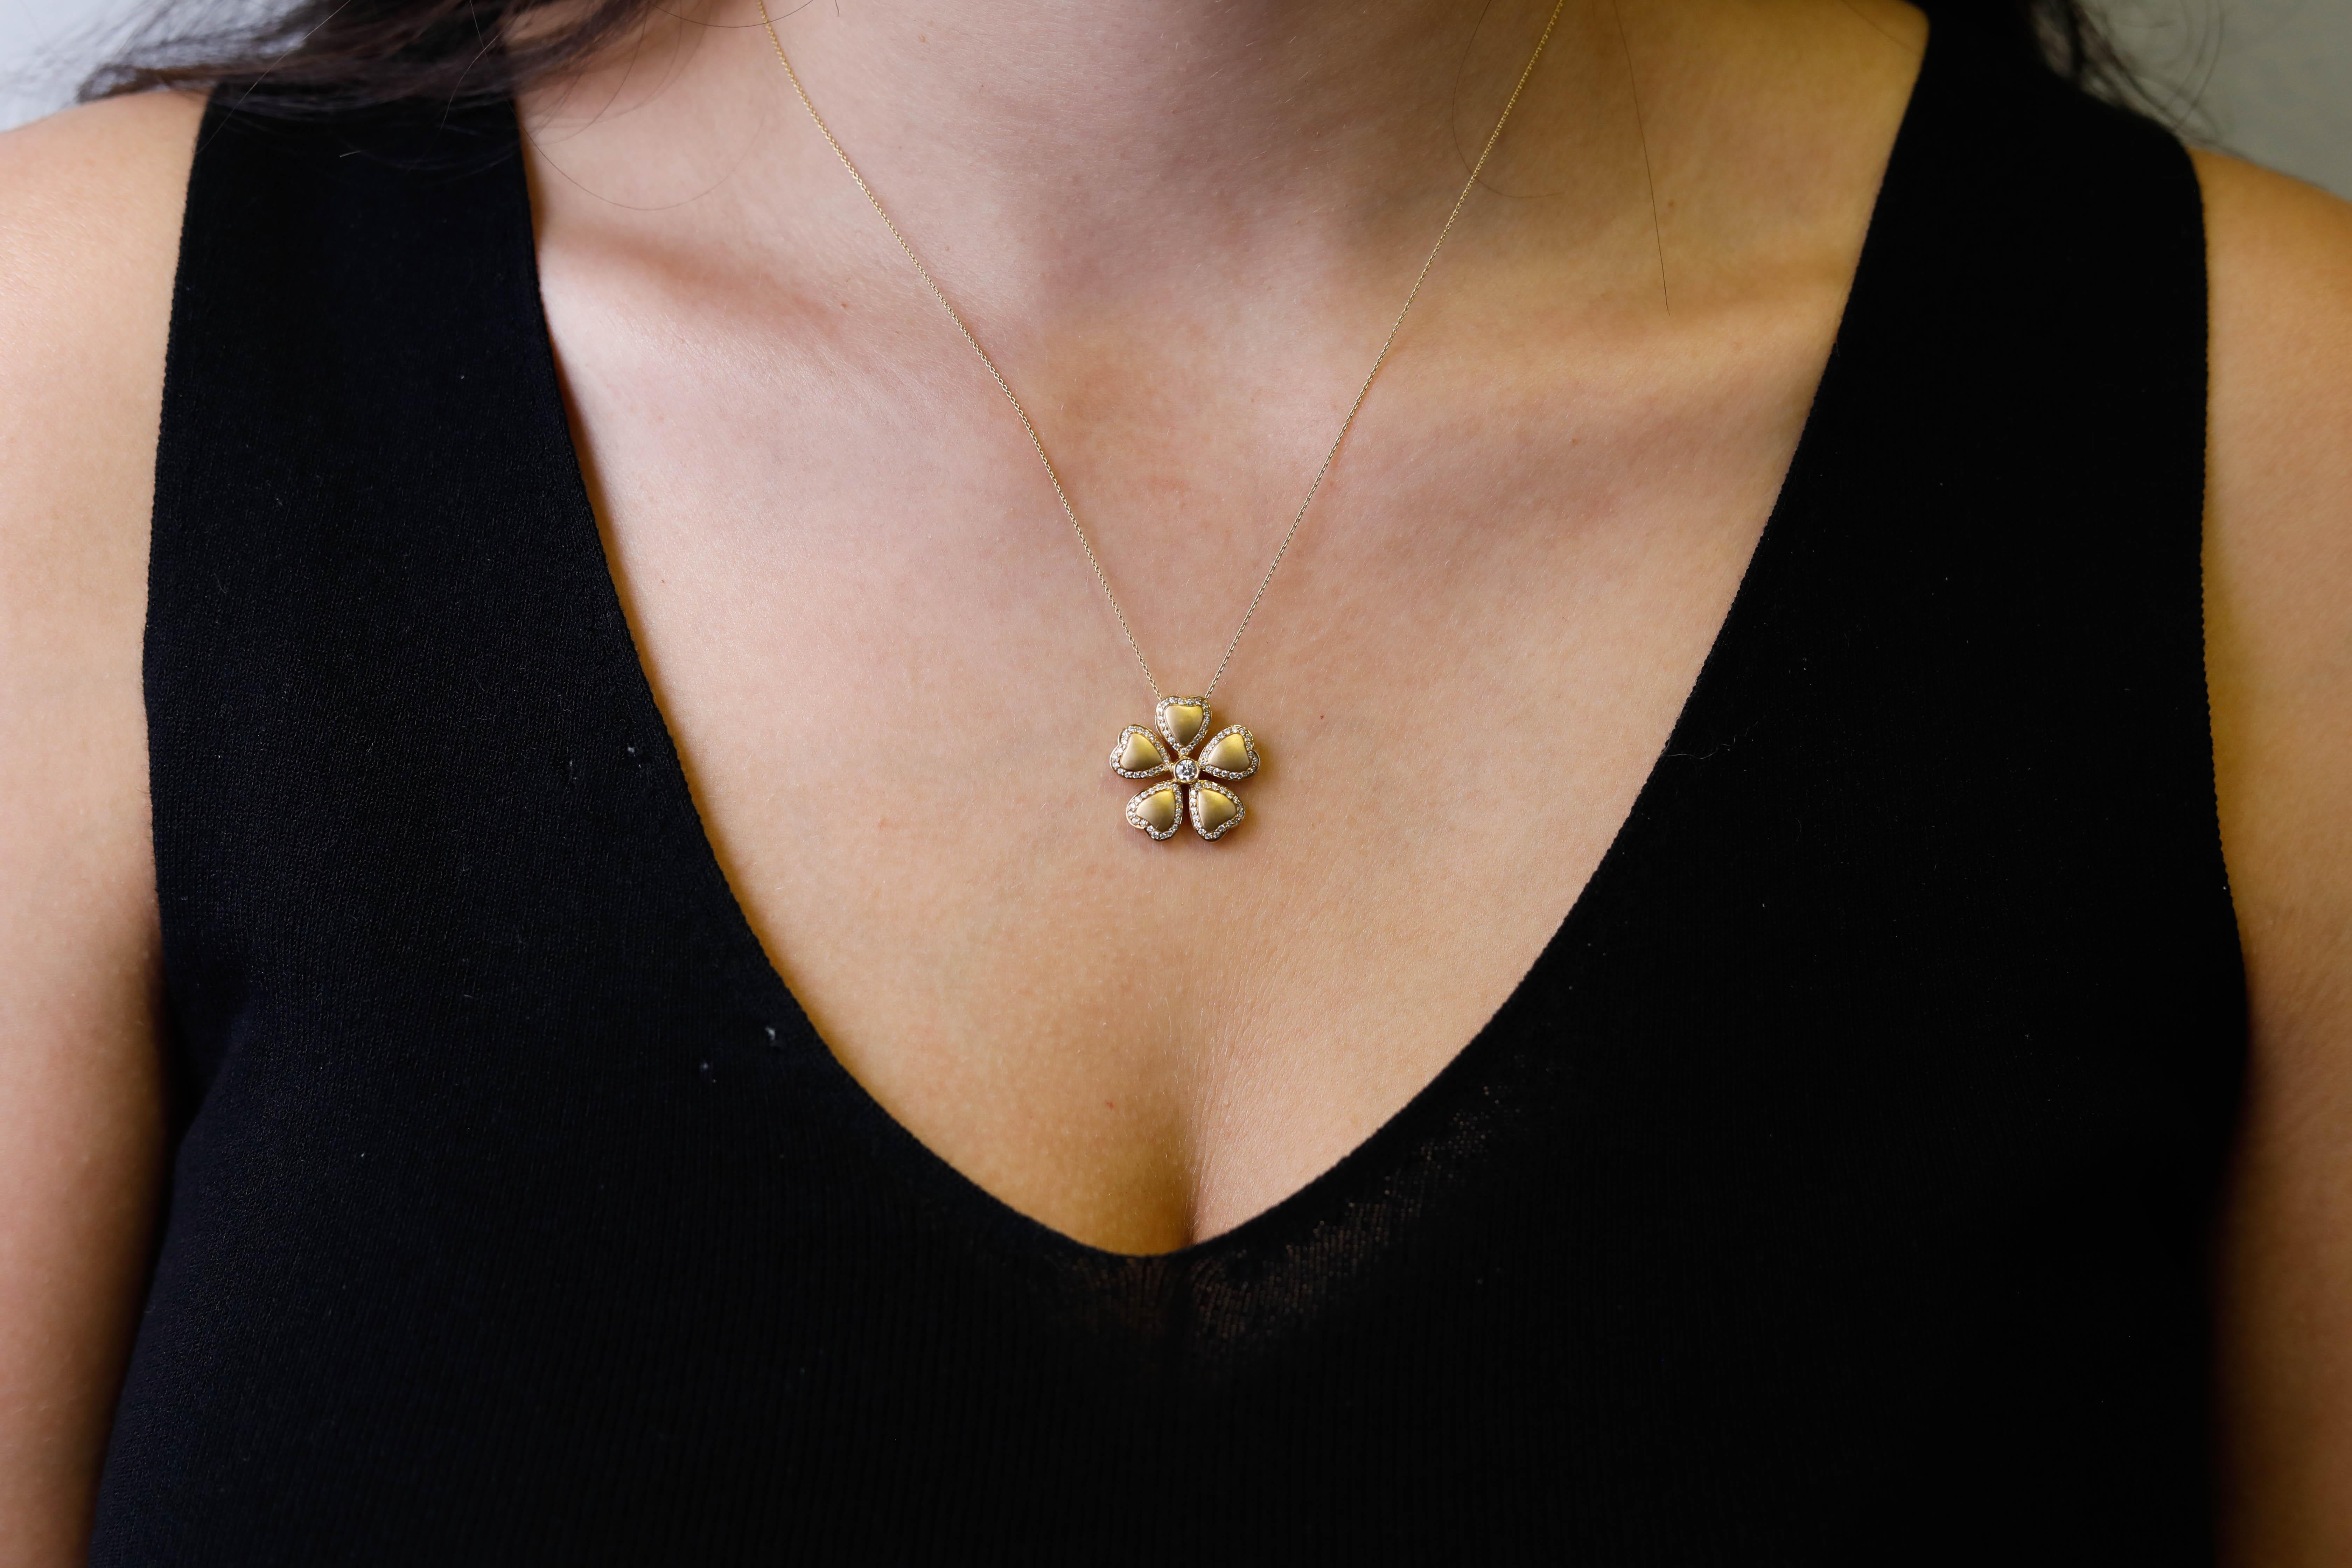 This 18K yellow gold diamond floral pendant necklace makes a feminine statement. The necklace features a unique flower design pendant with a round bezel set diamond in the center and five heart shaped petals edged with sparkling white round